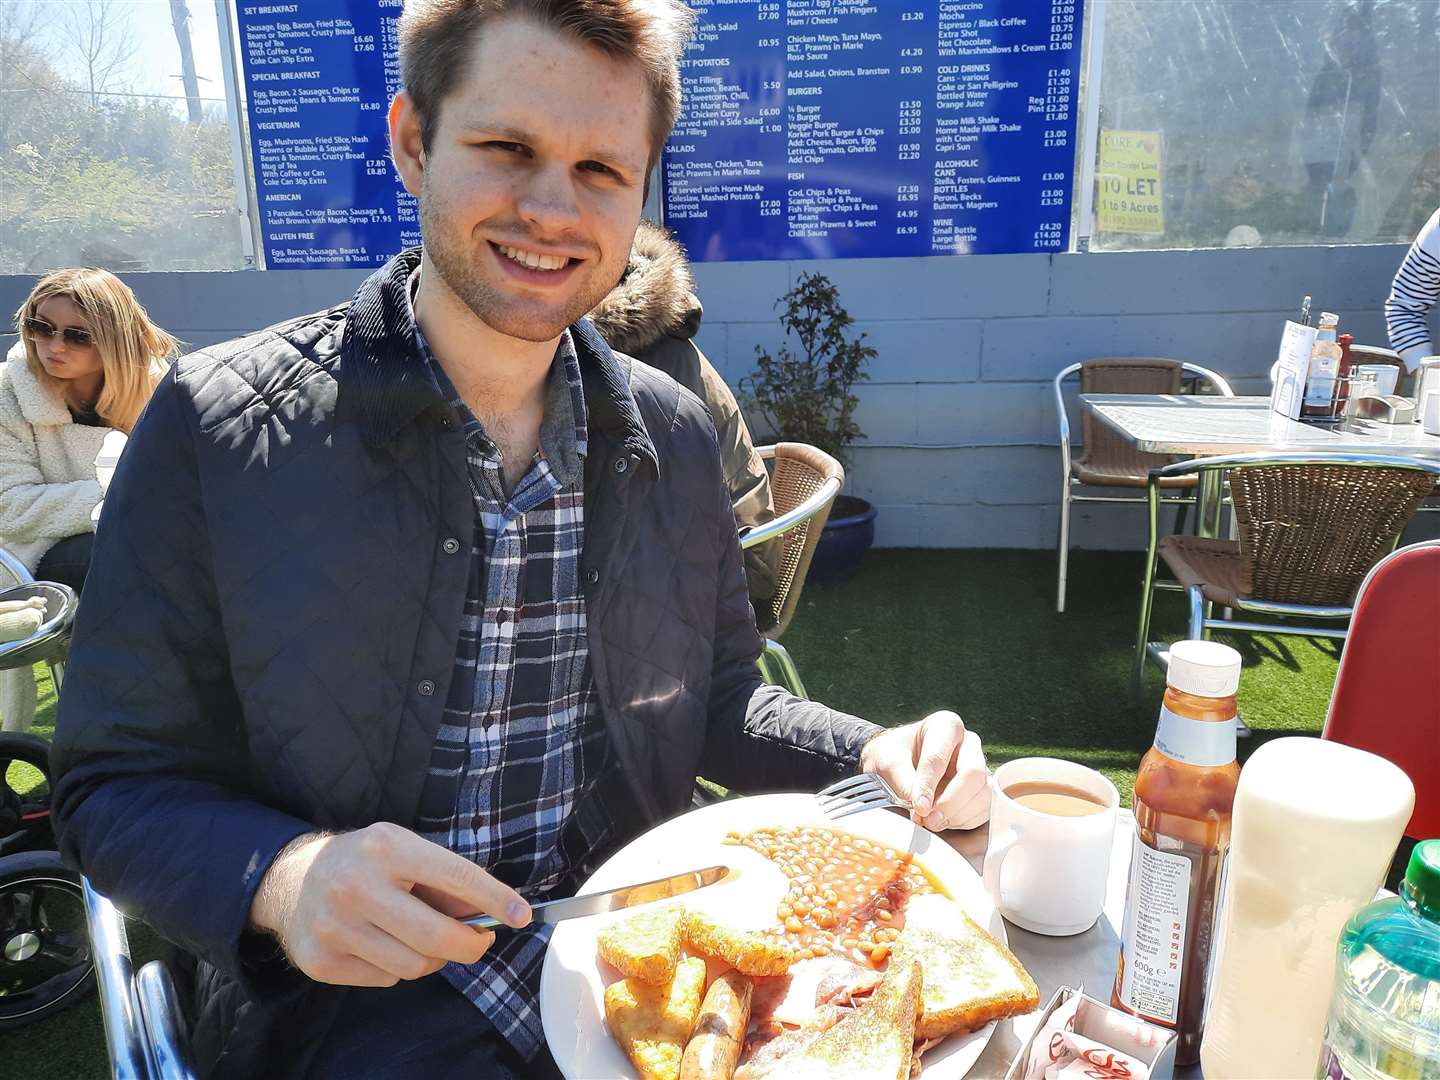 Jack with his fry-up from the Airport Café